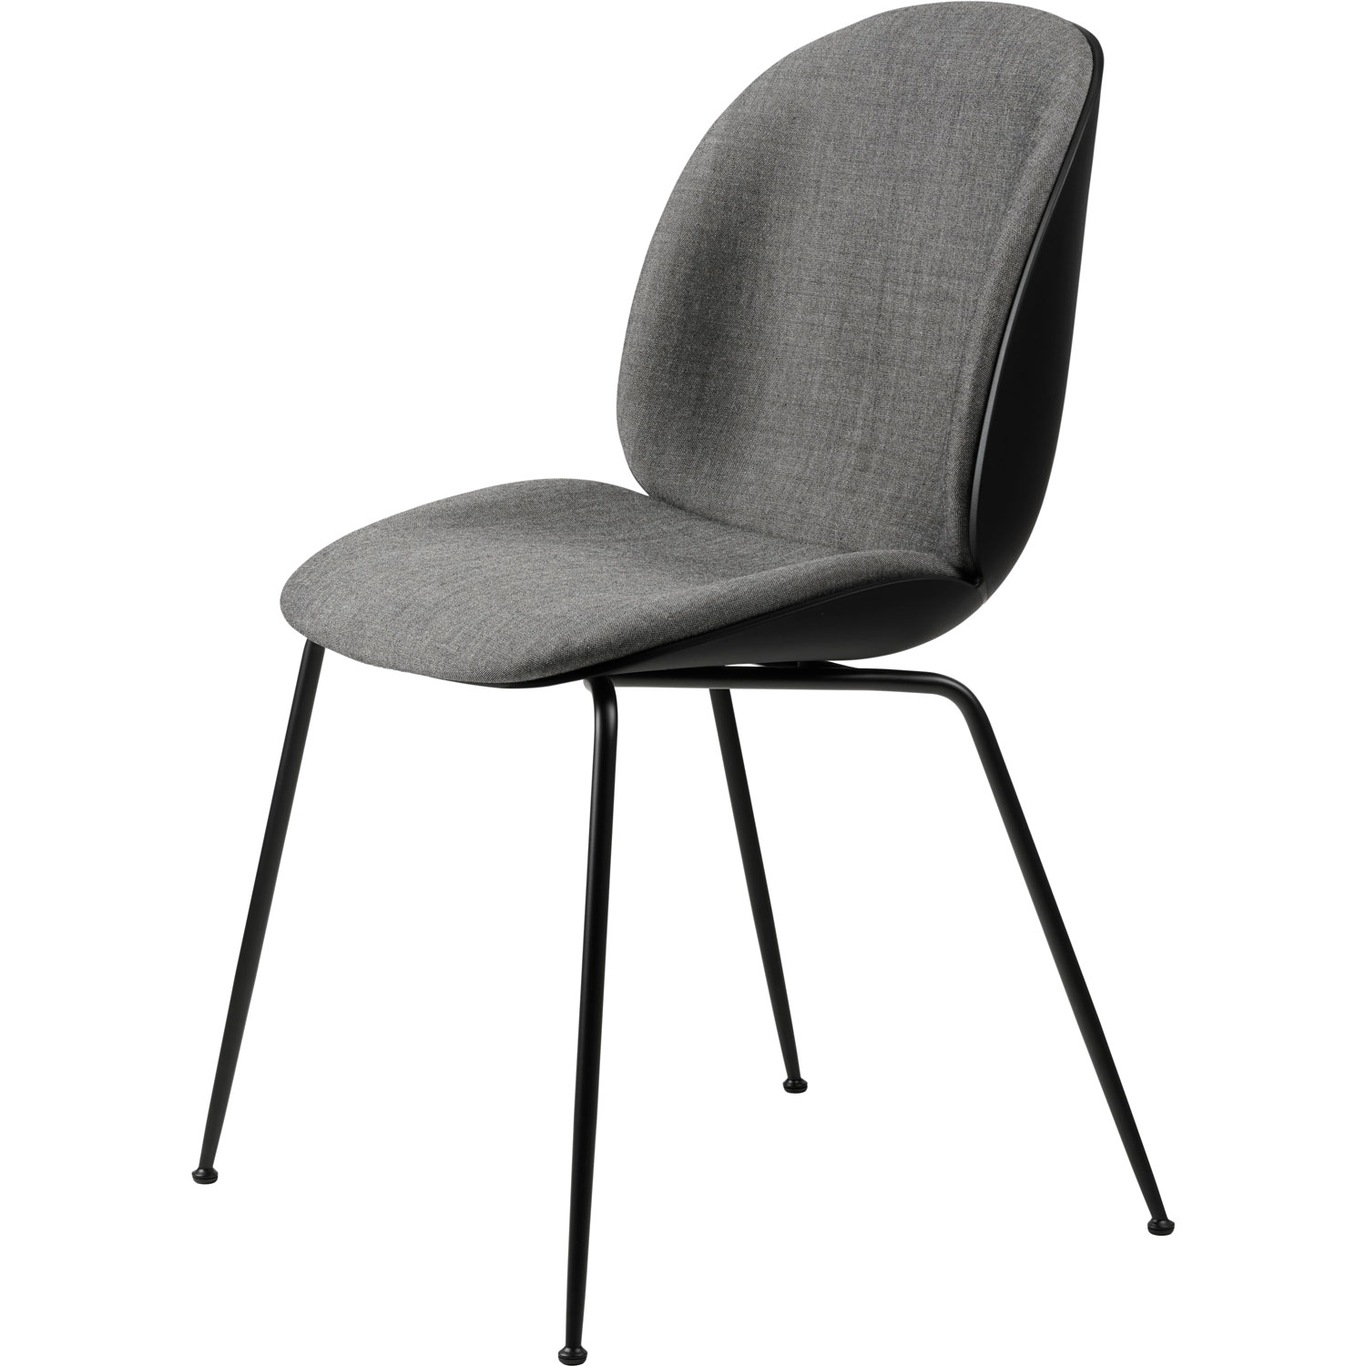 Beetle Chair Upholstered Front / Conical Base, Remix 3 152